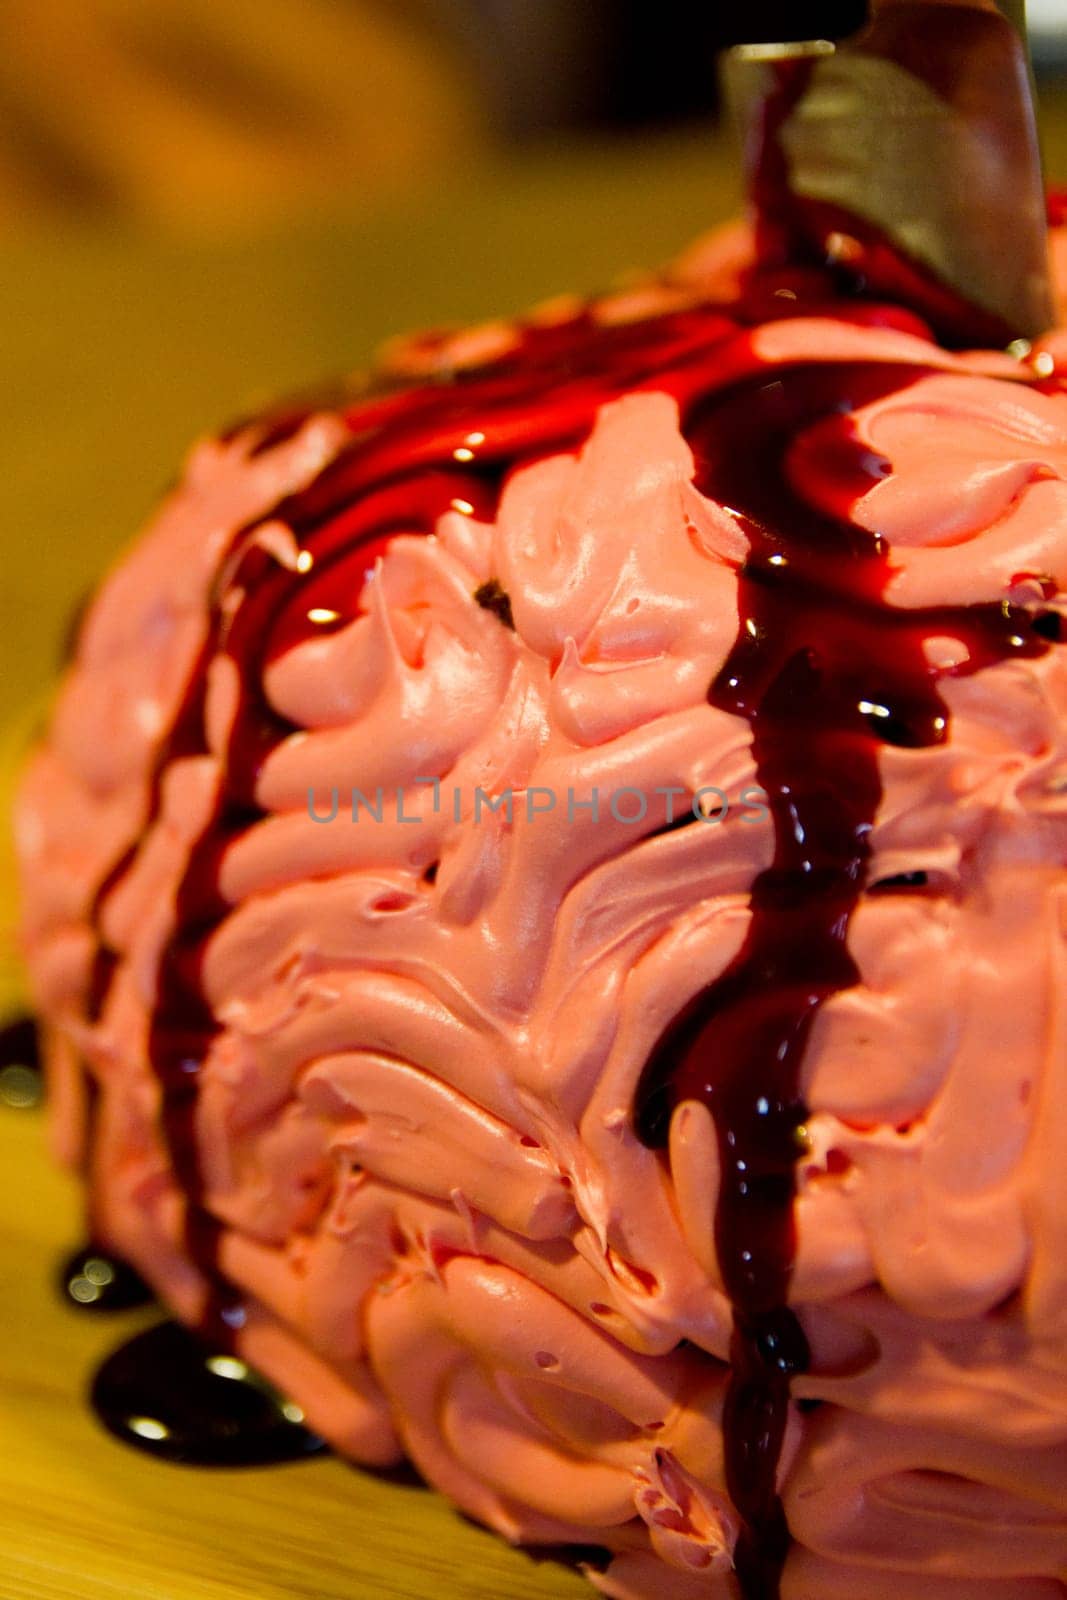 Delectably creep Halloween Brain dessert with swirls of pink frosting and a drizzle of 'blood' sauce, capturing the indulgence and art of dessert-making. Perfect for bakeries and culinary blogs seeking to inspire creepy but sweet cravings.